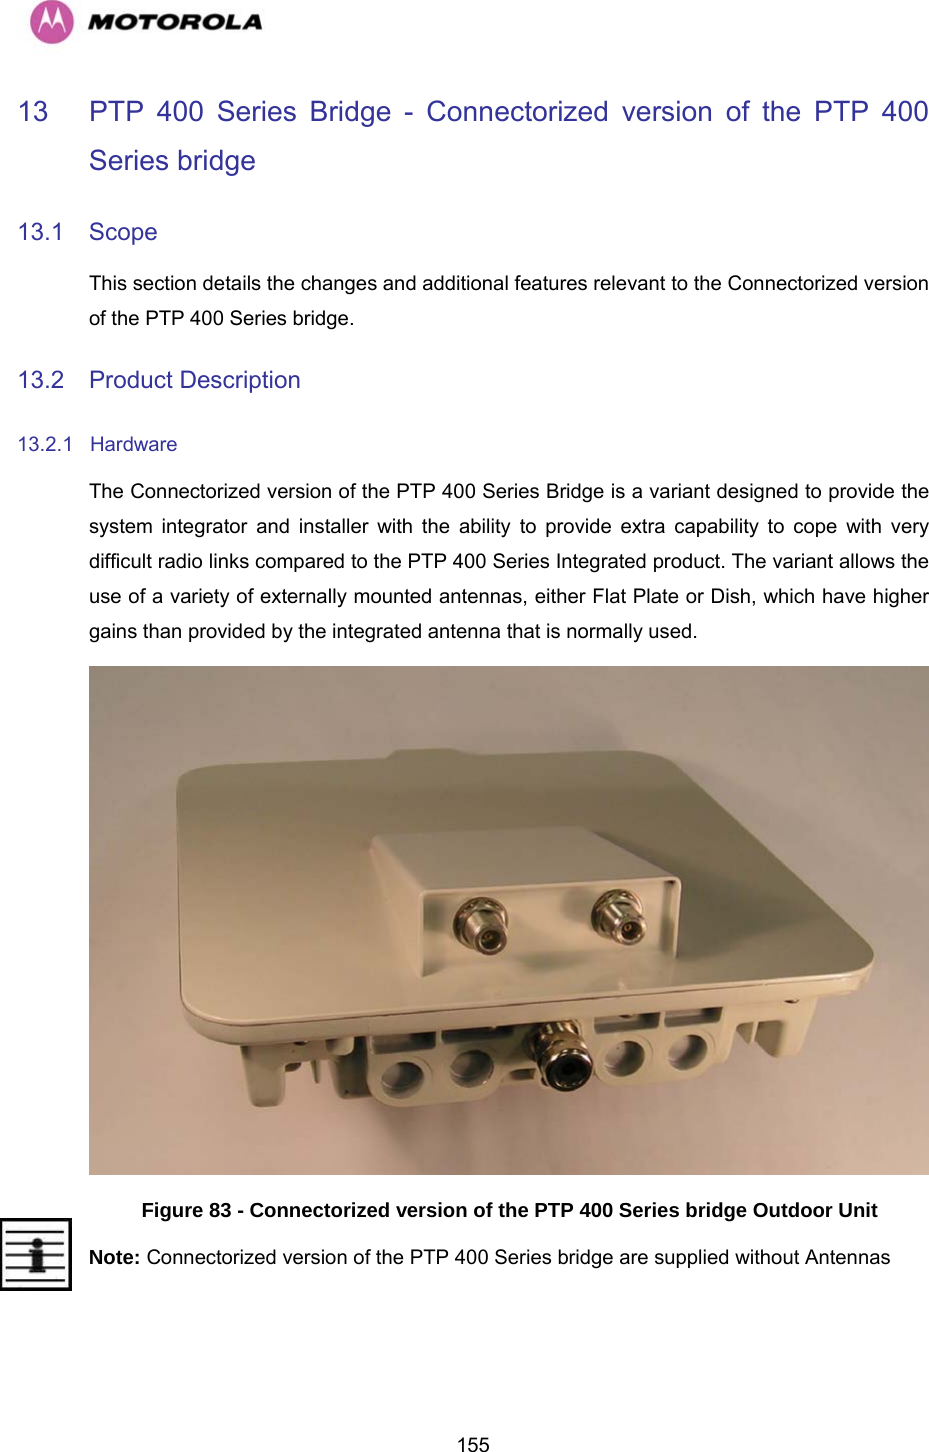   15513  PTP 400 Series Bridge - Connectorized version of the PTP 400 Series bridge  13.1 Scope This section details the changes and additional features relevant to the Connectorized version of the PTP 400 Series bridge. 13.2 Product Description 13.2.1 Hardware The Connectorized version of the PTP 400 Series Bridge is a variant designed to provide the system integrator and installer with the ability to provide extra capability to cope with very difficult radio links compared to the PTP 400 Series Integrated product. The variant allows the use of a variety of externally mounted antennas, either Flat Plate or Dish, which have higher gains than provided by the integrated antenna that is normally used.  Figure 83 - Connectorized version of the PTP 400 Series bridge Outdoor Unit Note: Connectorized version of the PTP 400 Series bridge are supplied without Antennas  